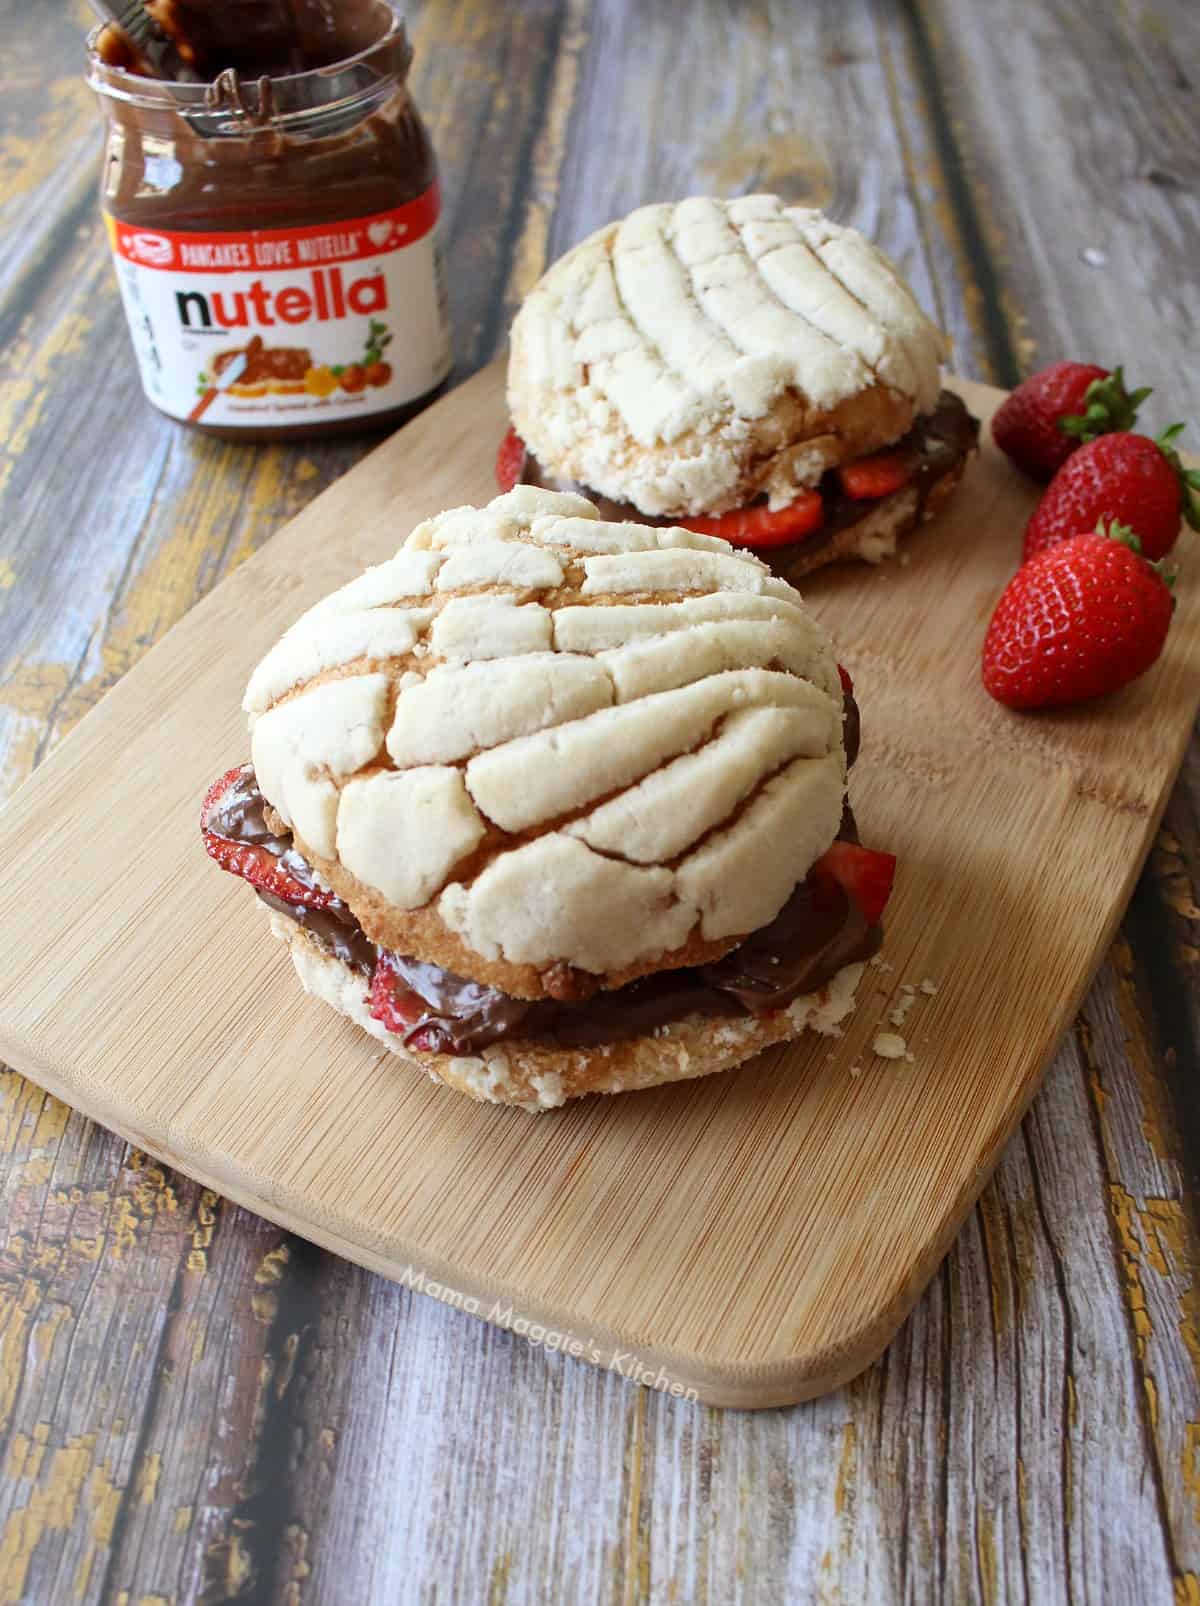 A picture of nutella stuffed conchas on a wooden cutting board next to an open container of nutella.